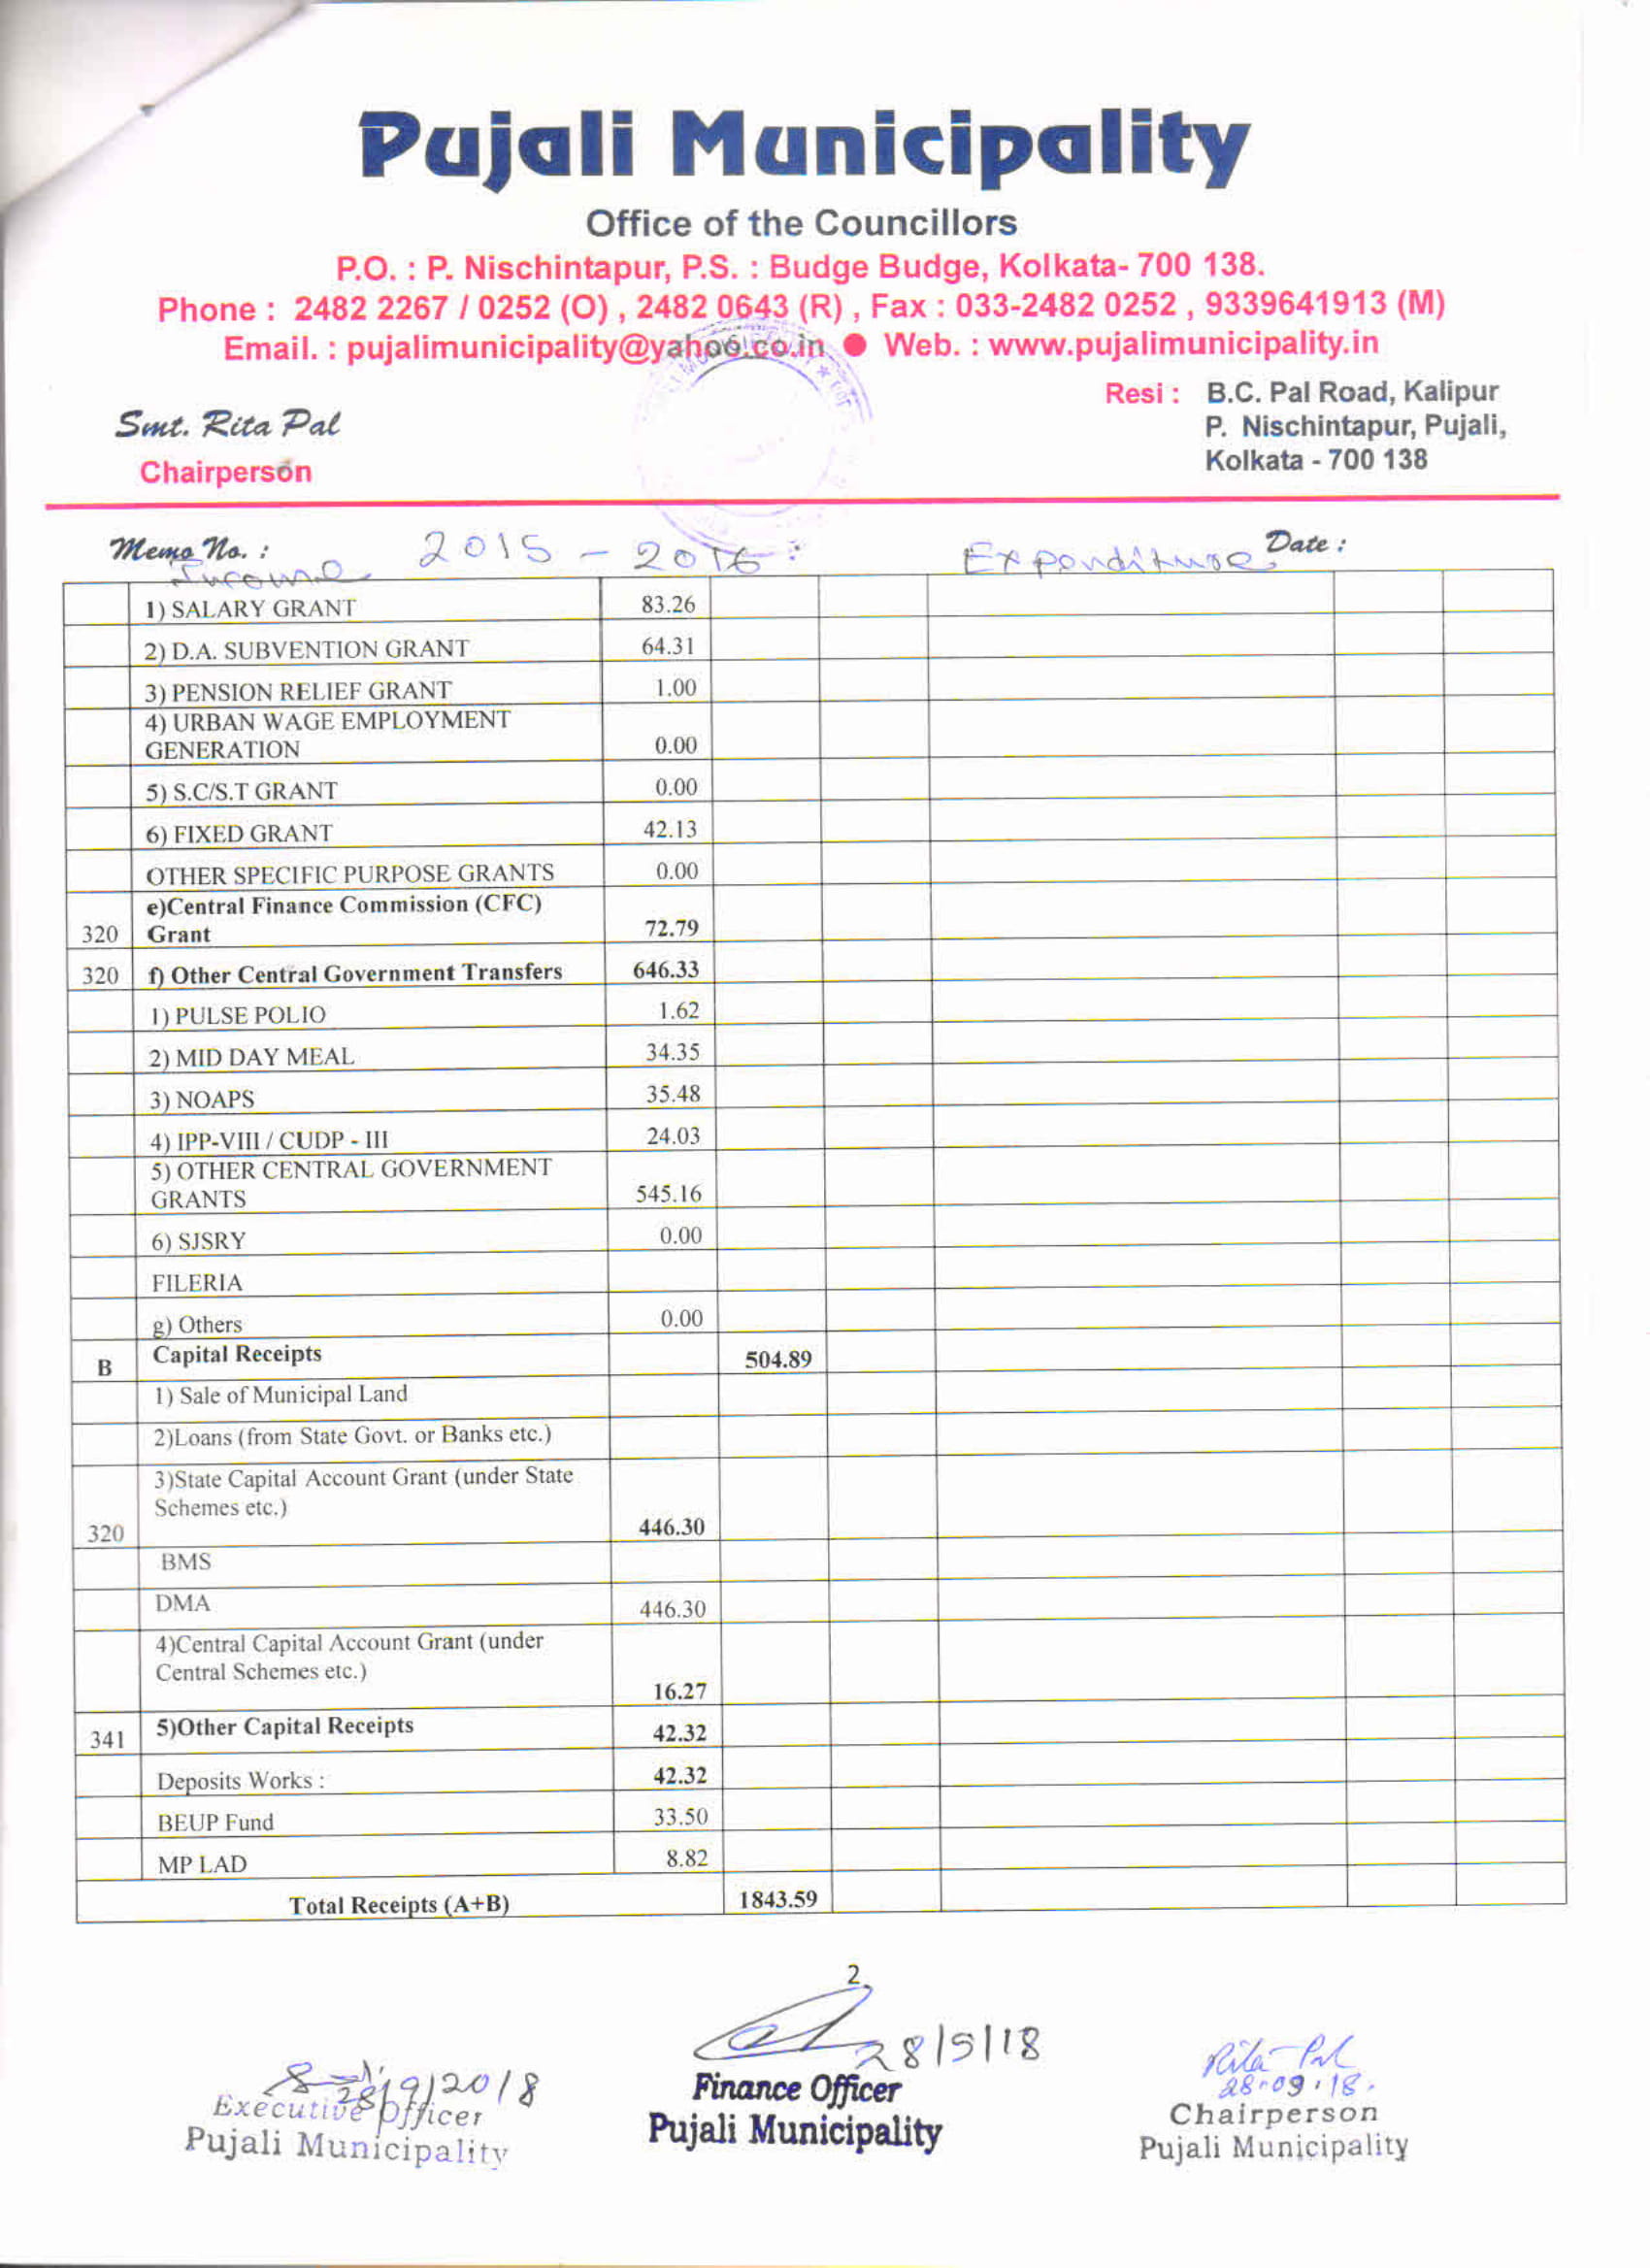 Audit Report with Receipts Payments-03